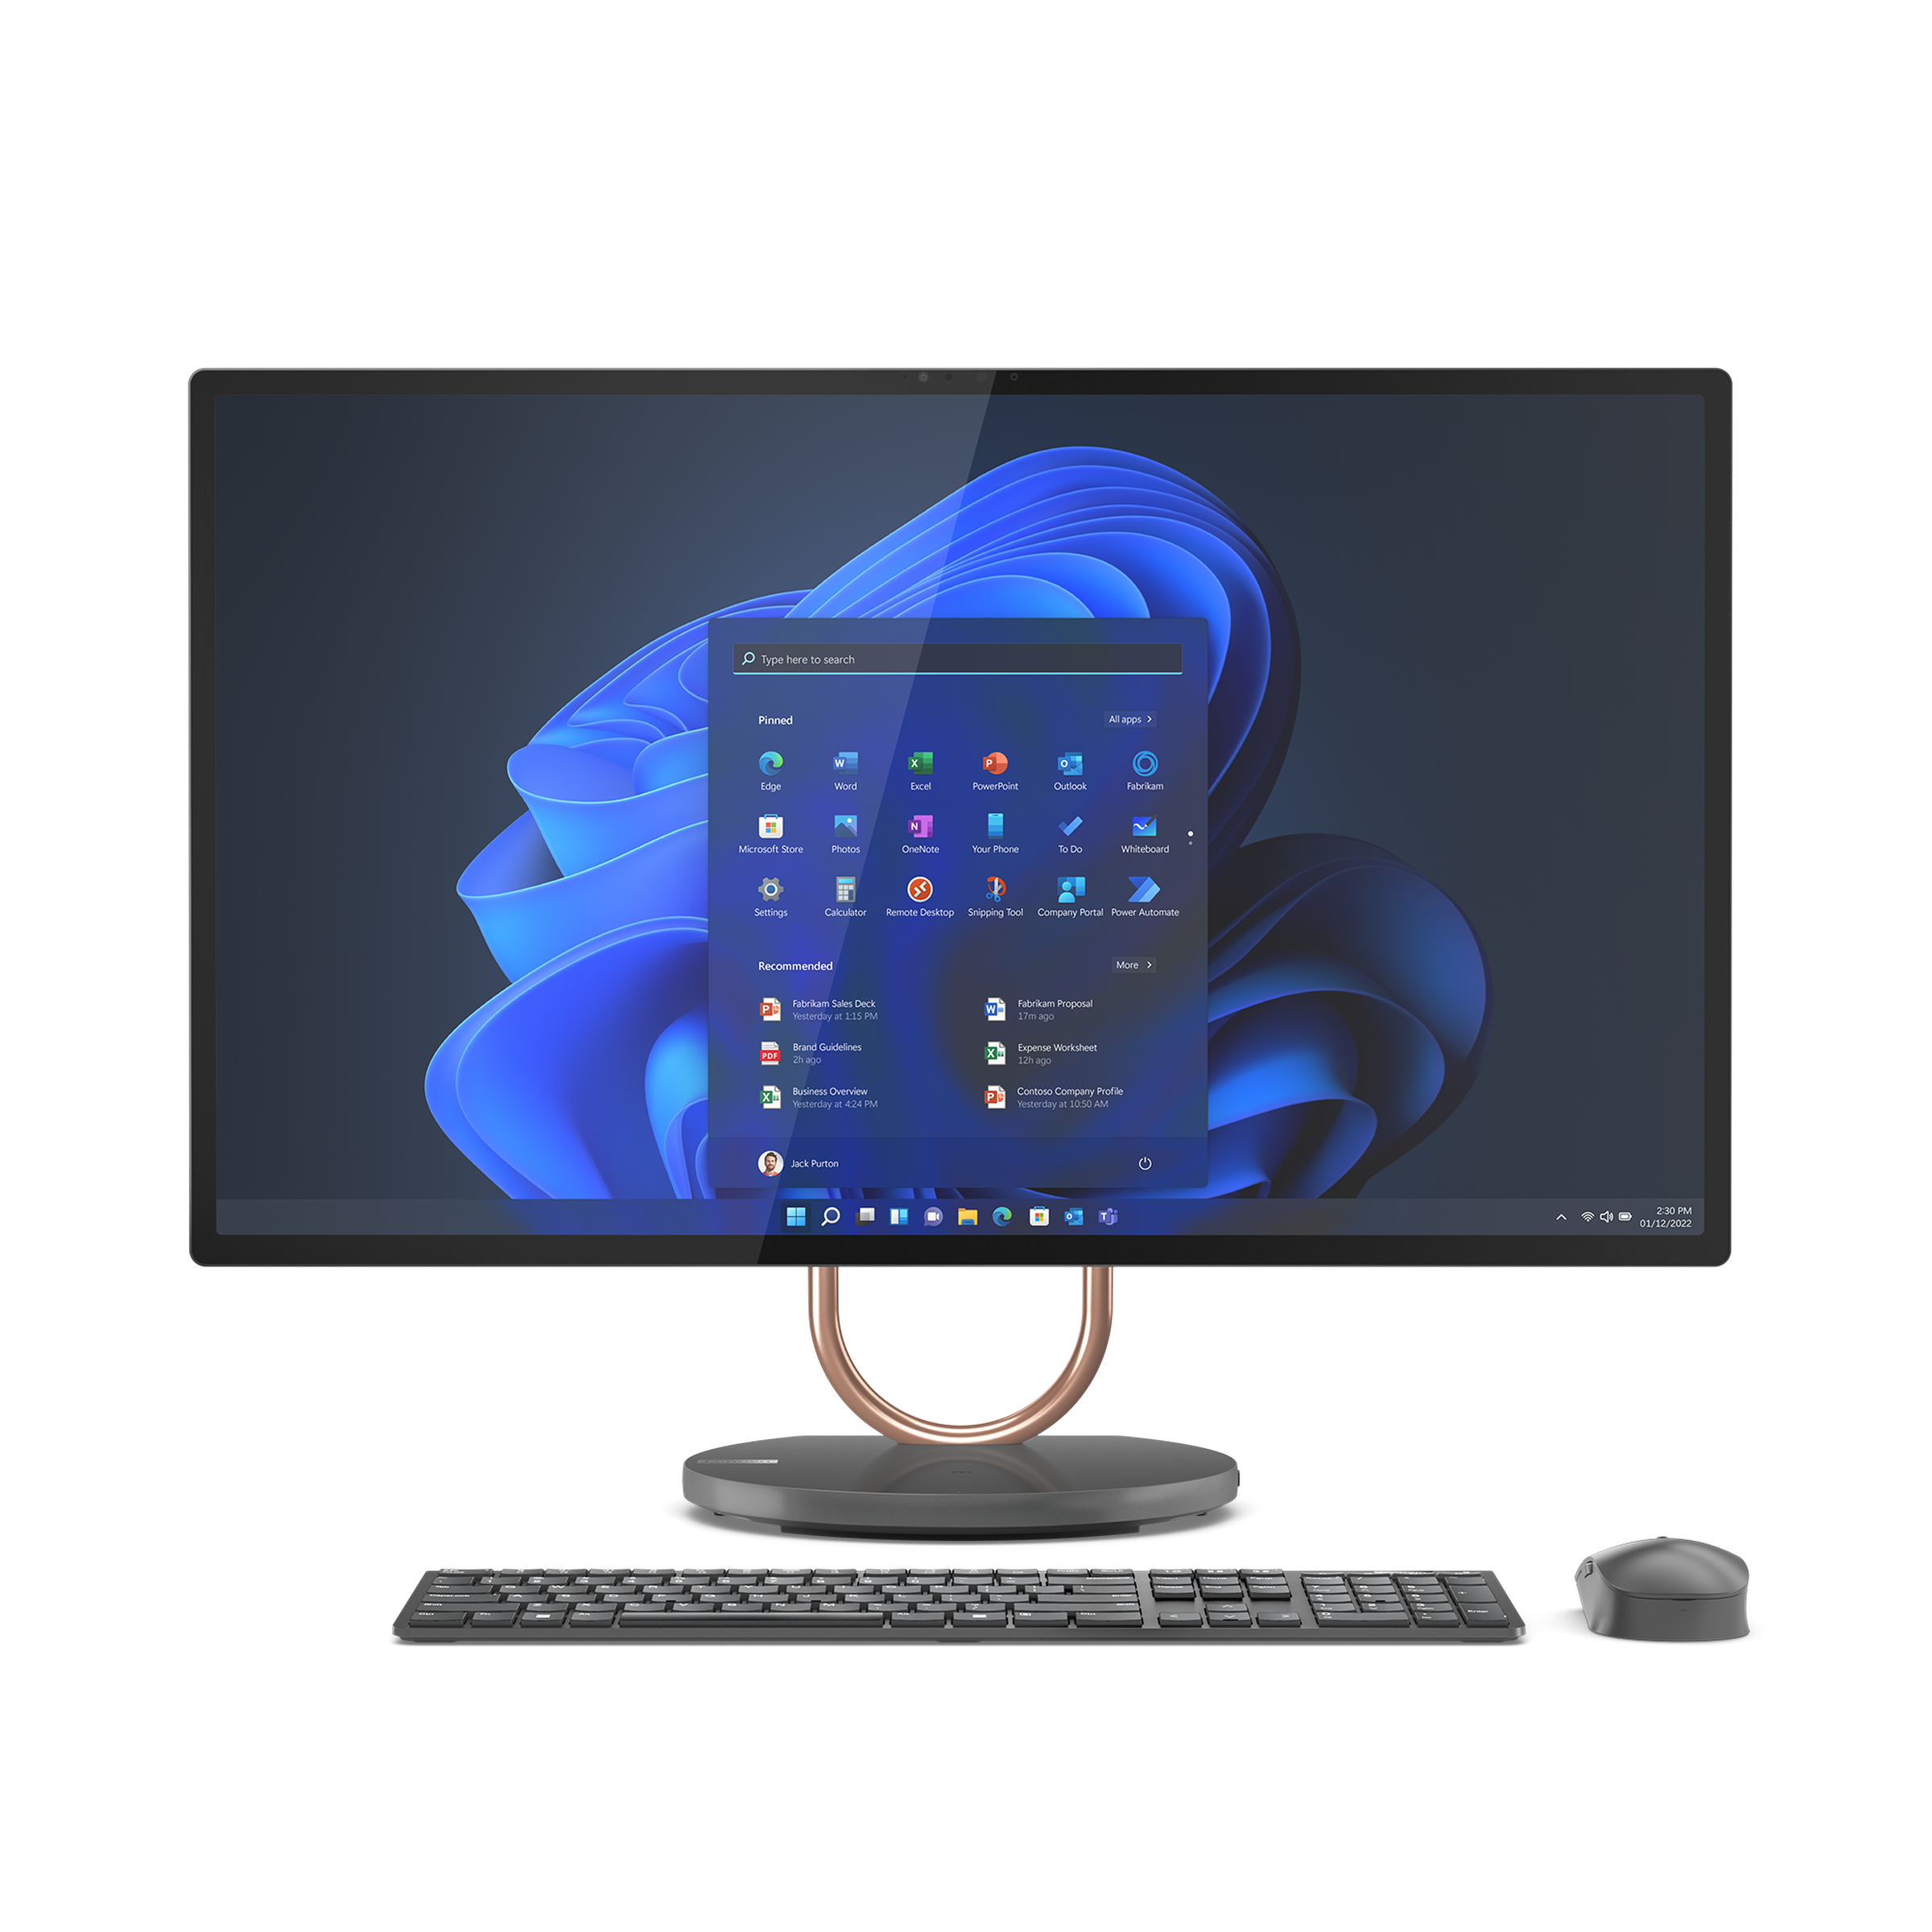 Image of Lenovo’s Yoga AIO 9i with a keyboard and mouse.